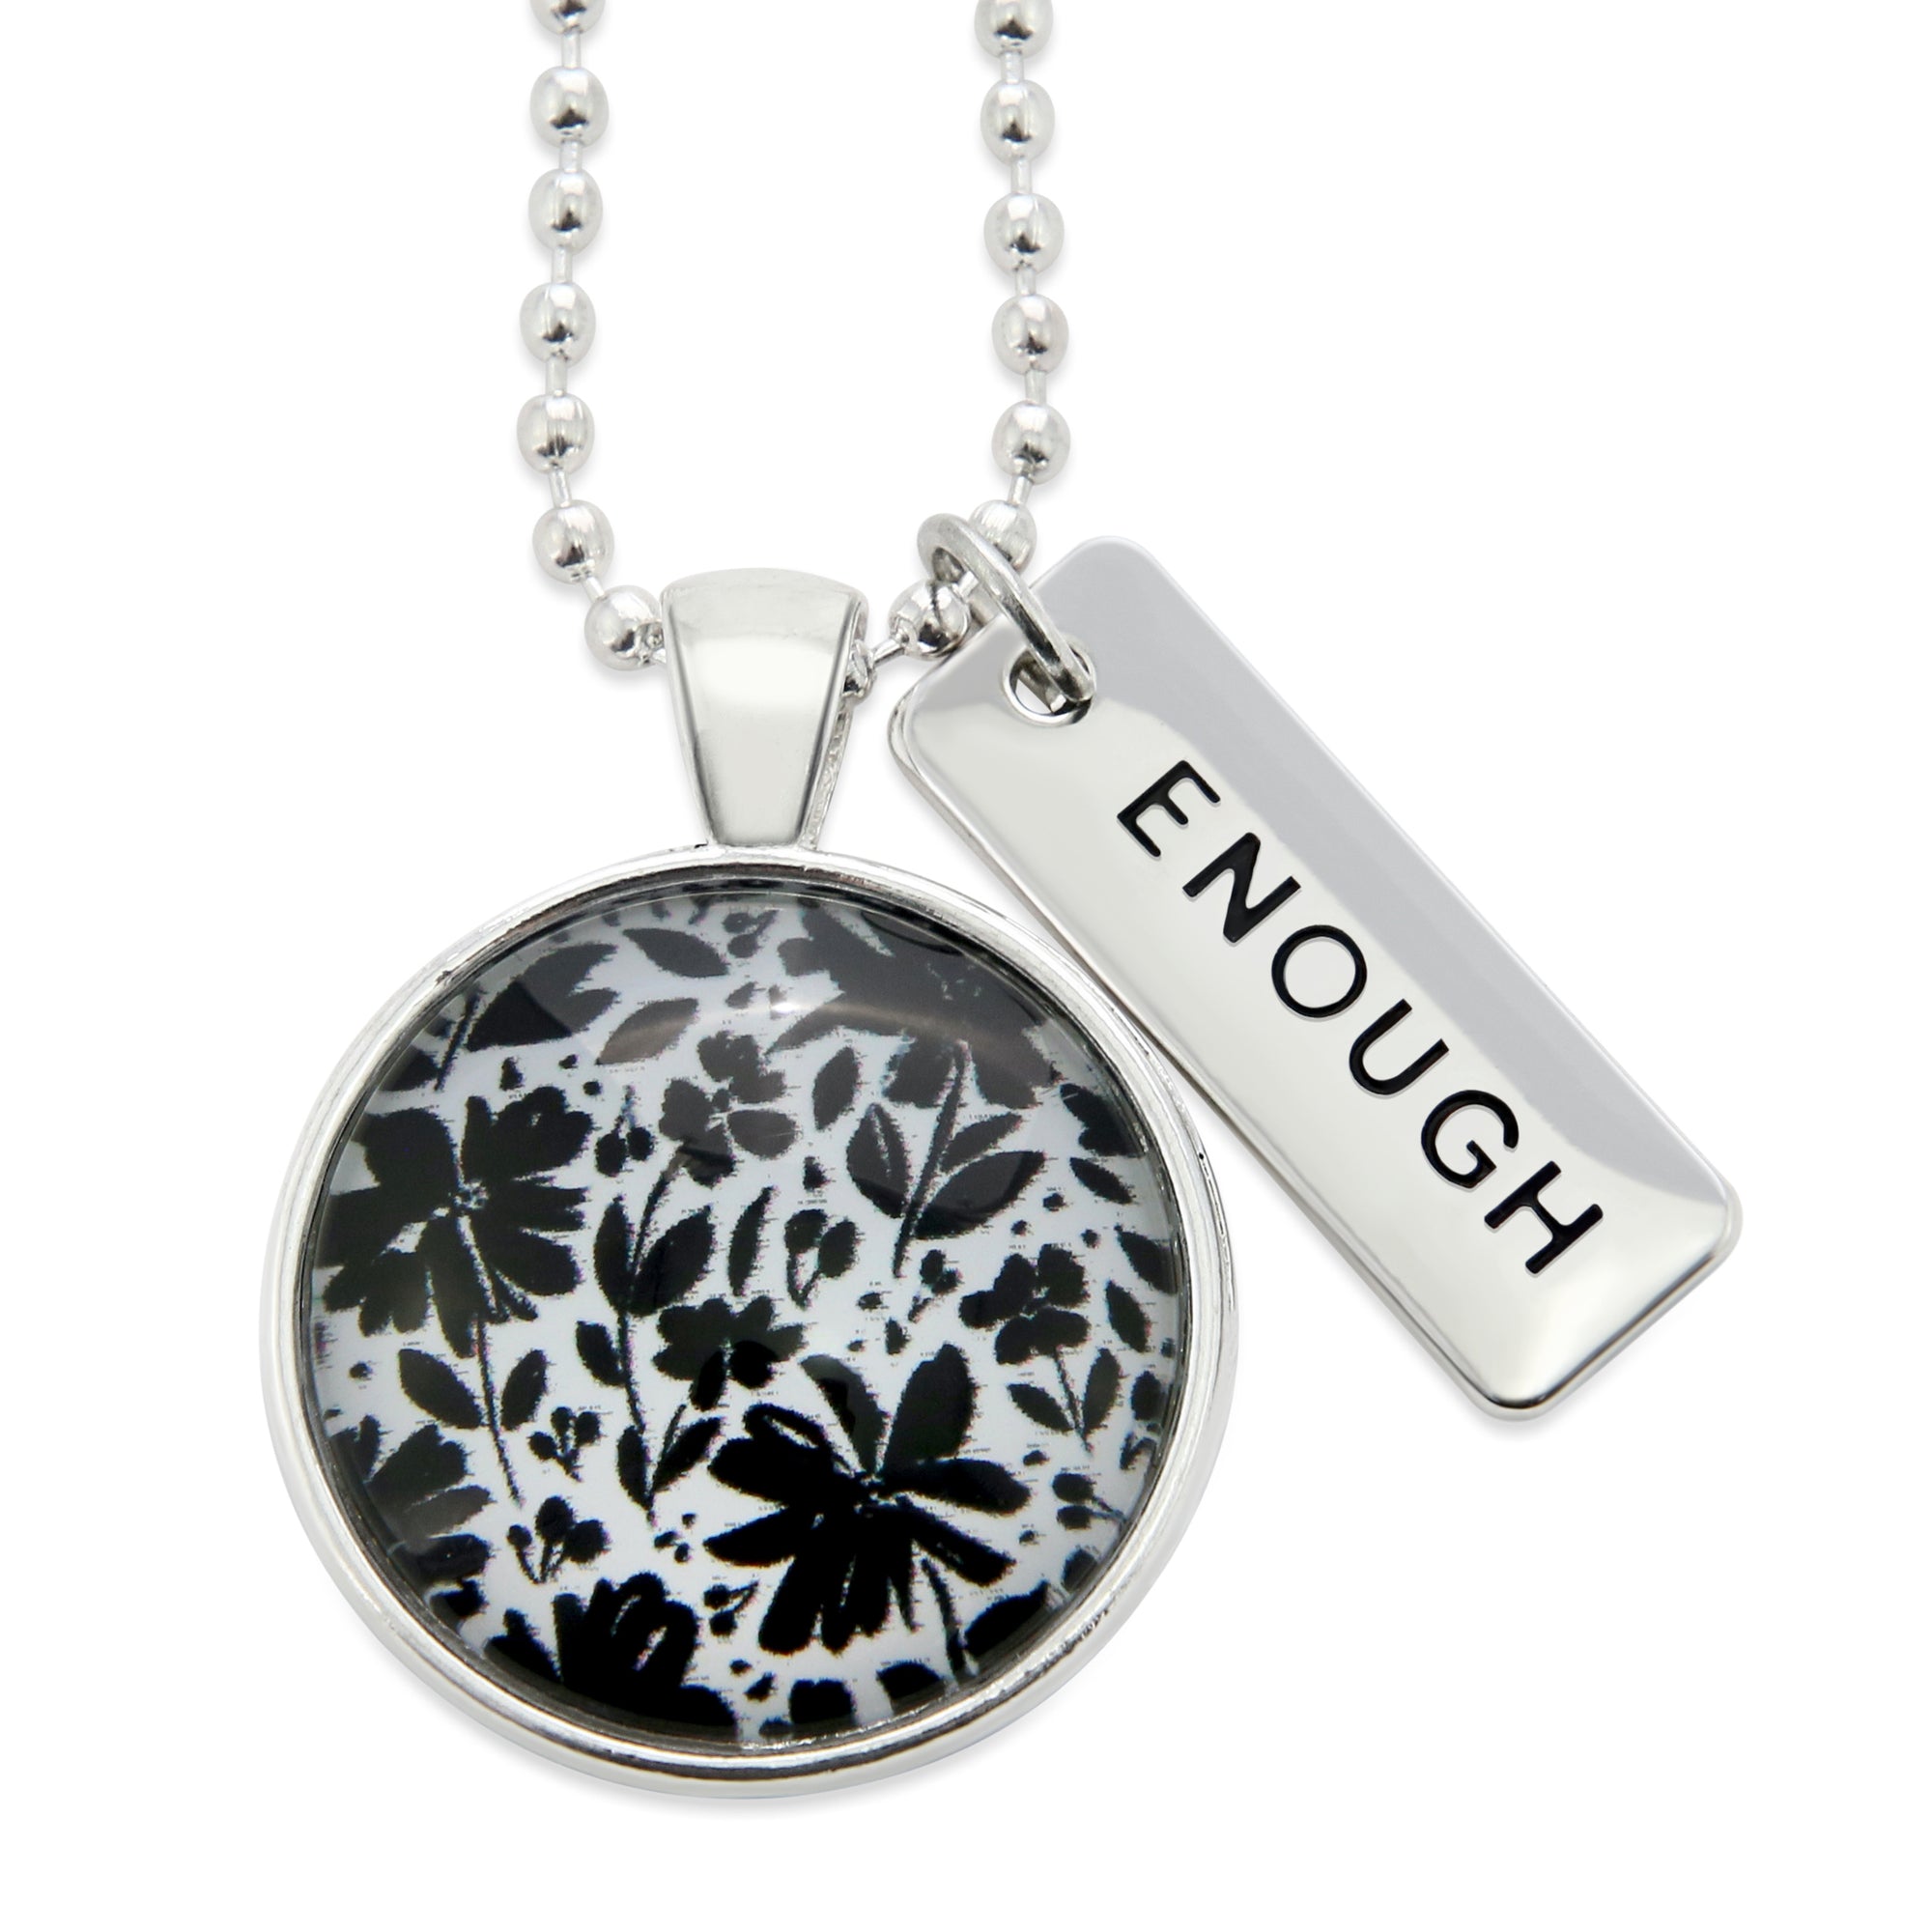 Black & White Collection - Bright Silver 'ENOUGH' Necklace - Inky Buds (10852)